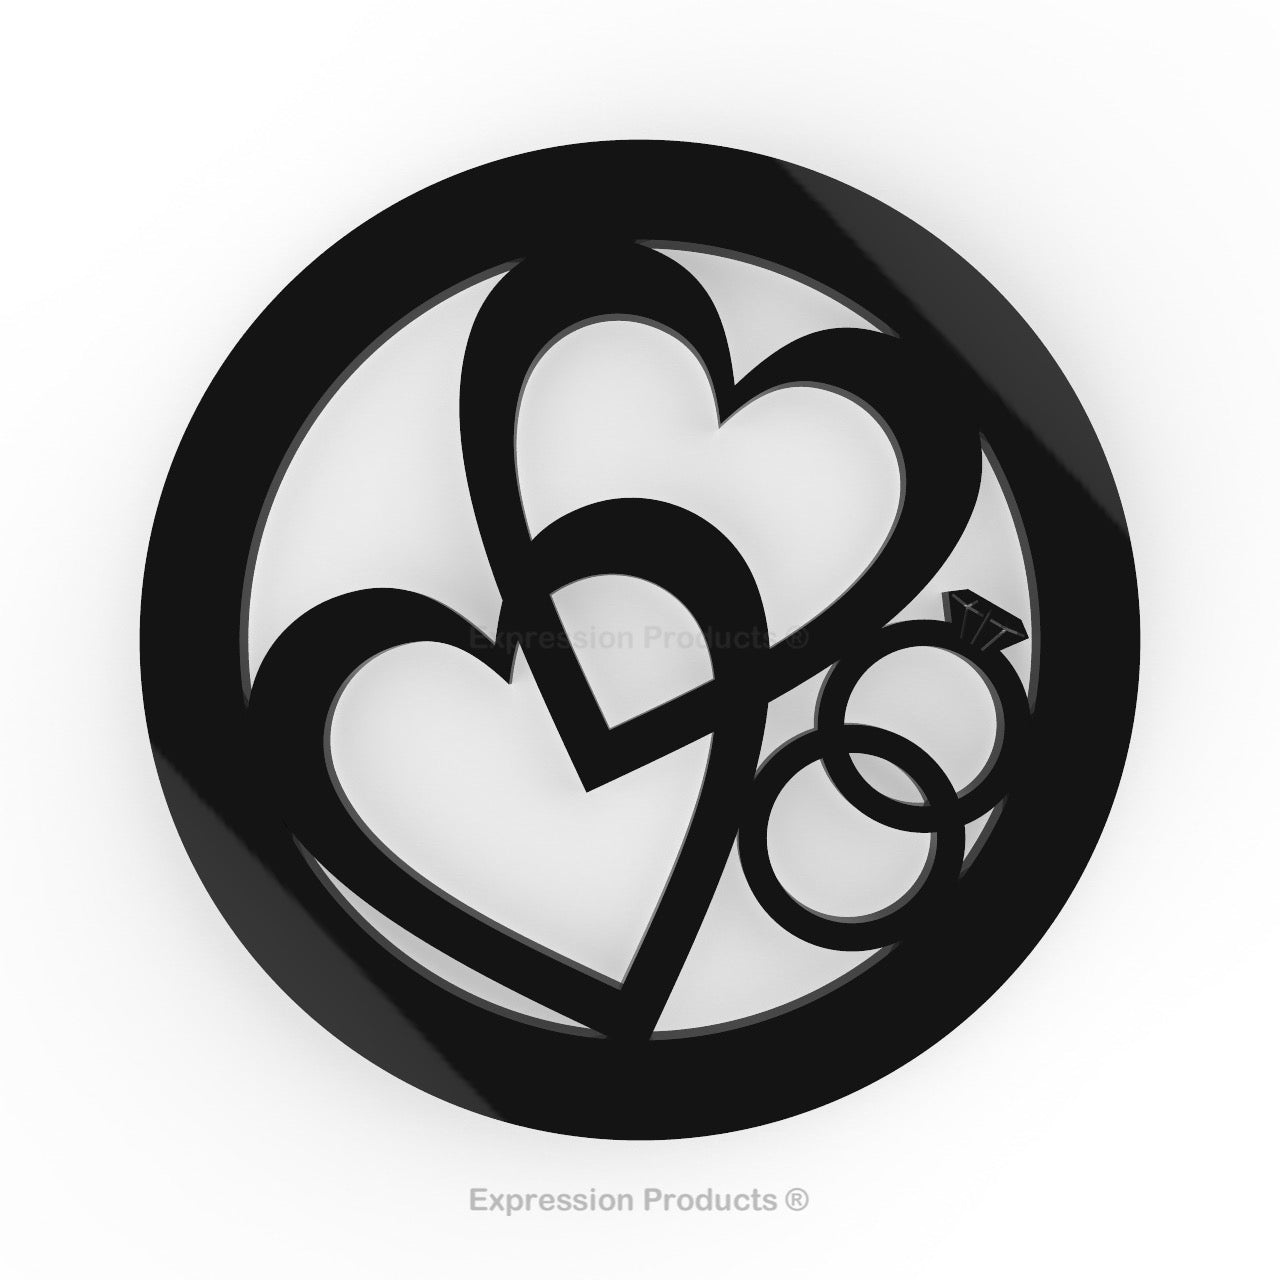 6 - Wedding Drink Coasters - Black or White Acrylic Wedding Table Decorations - Expression Products Ltd